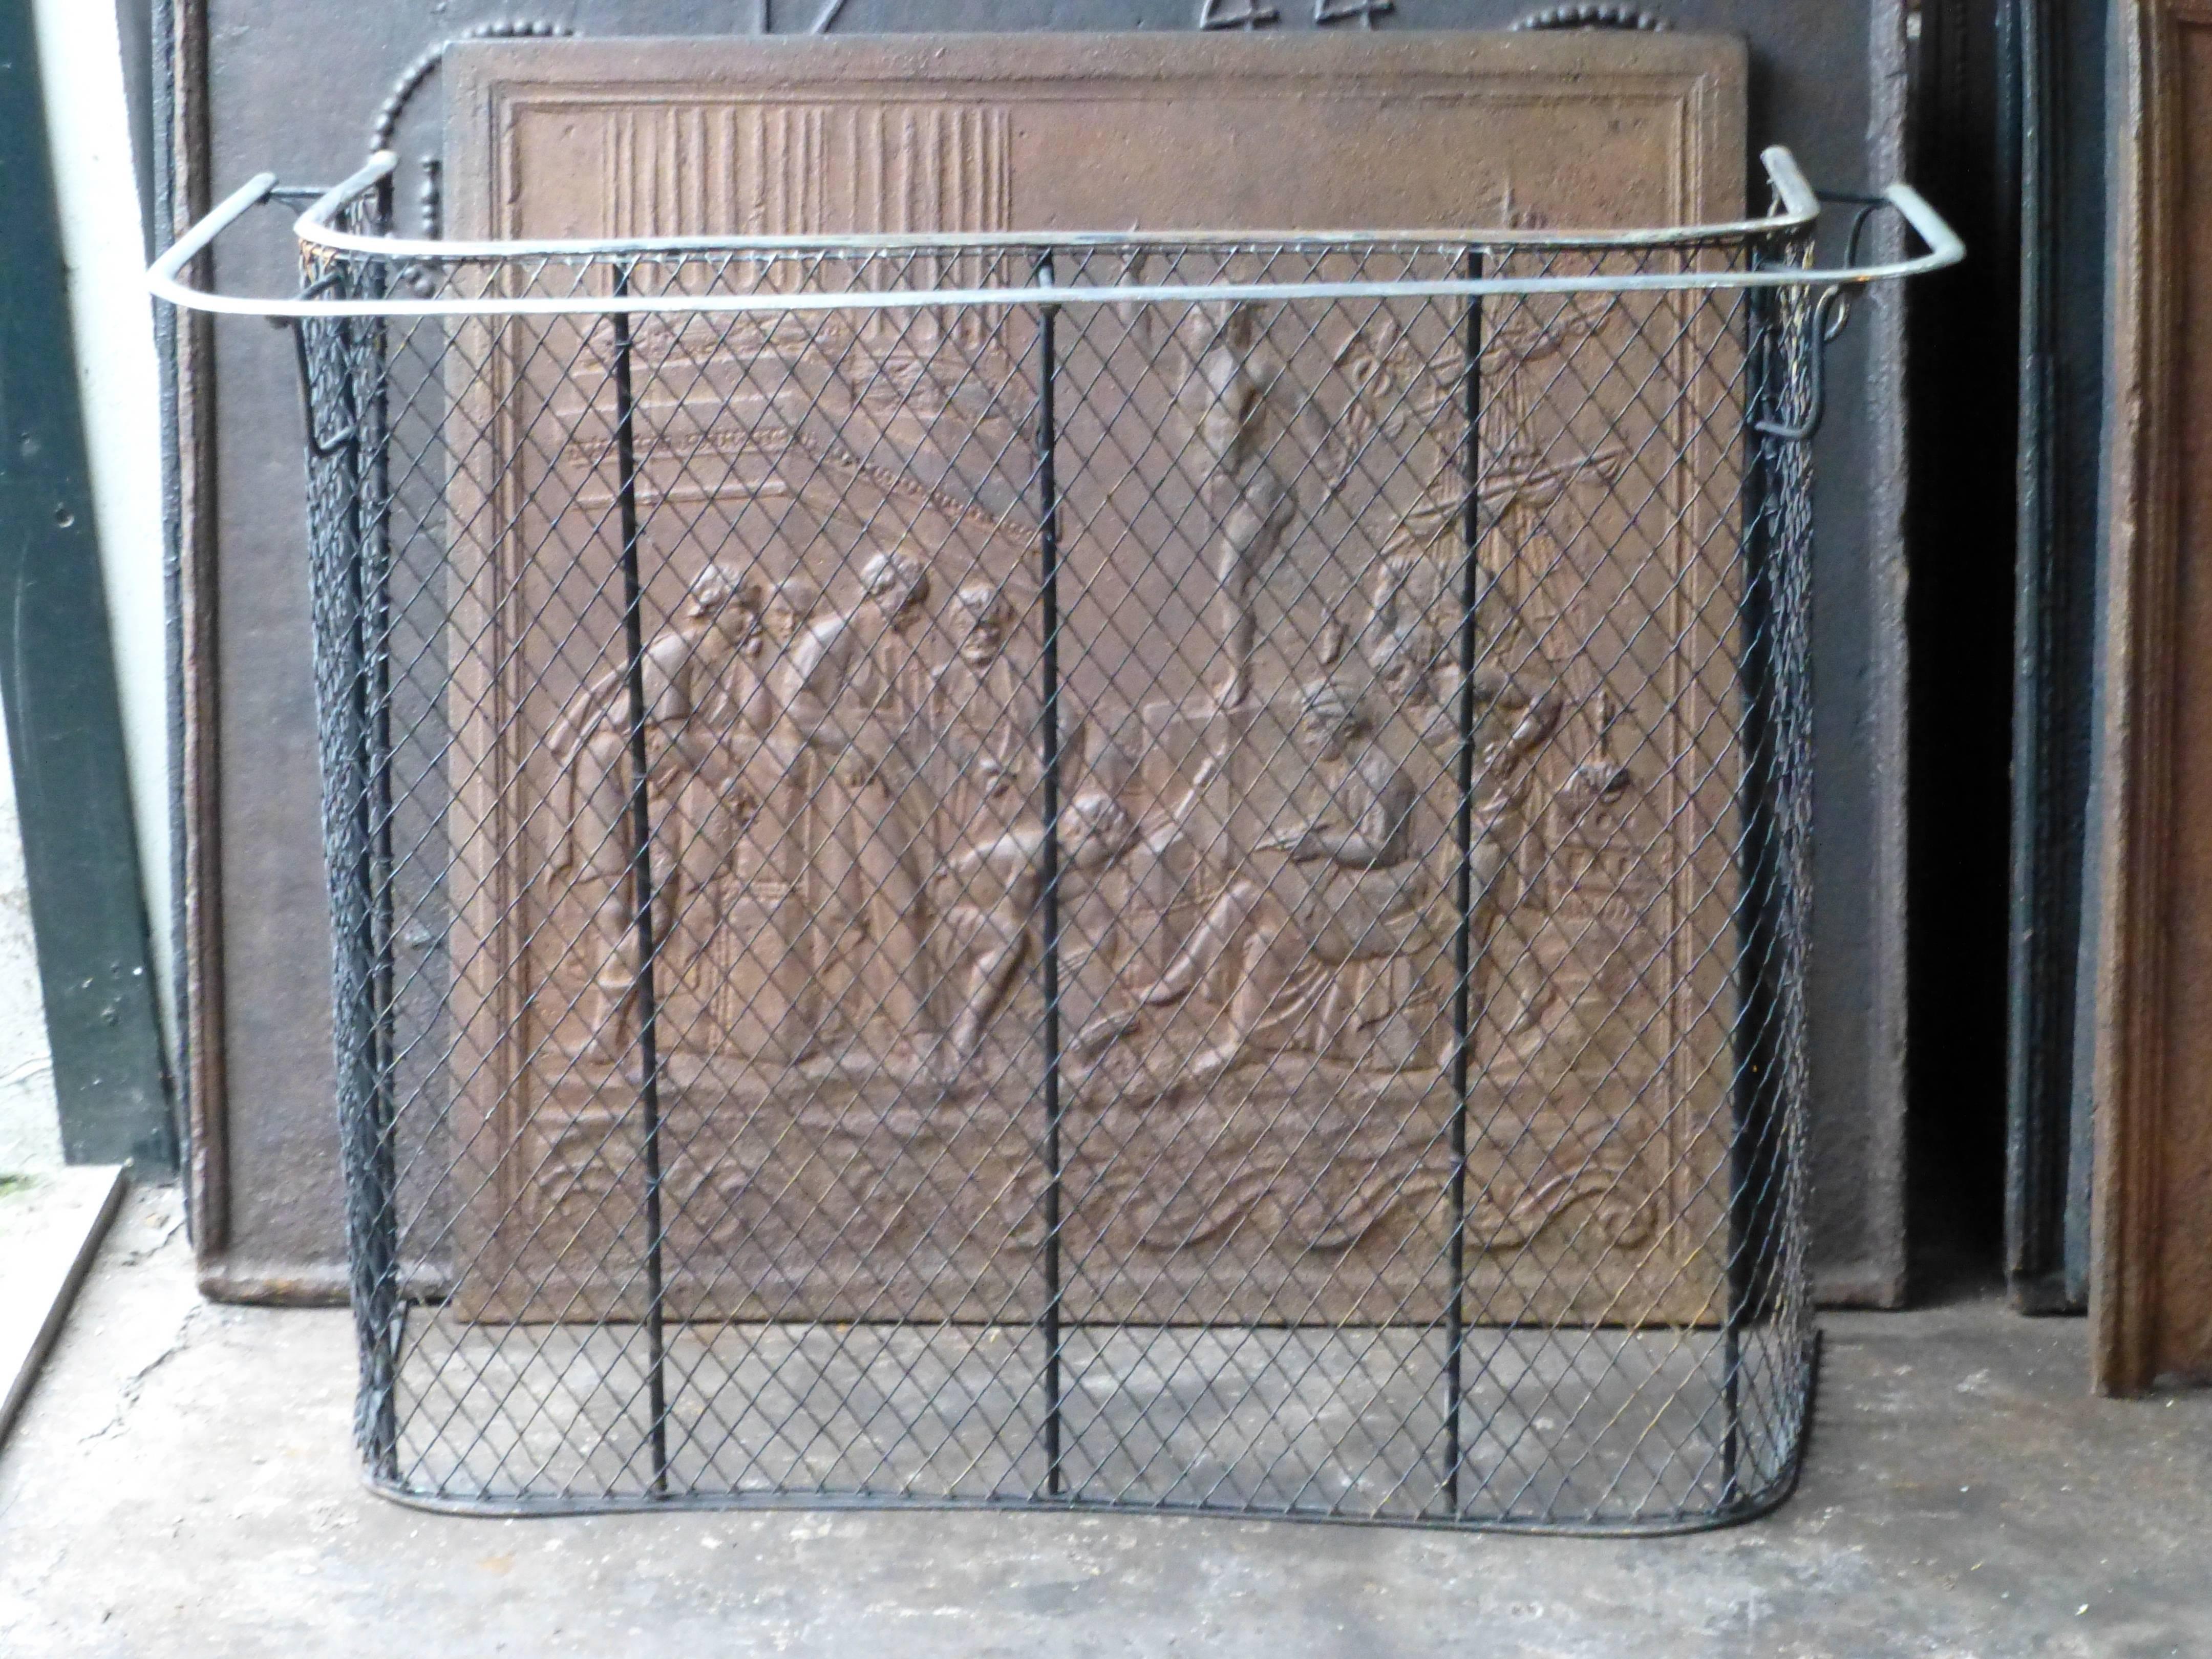 We always have 50+ antique fire screens - fireplace screens and fenders in stock that can be ordered on line. See our website for our current stock and prices.
